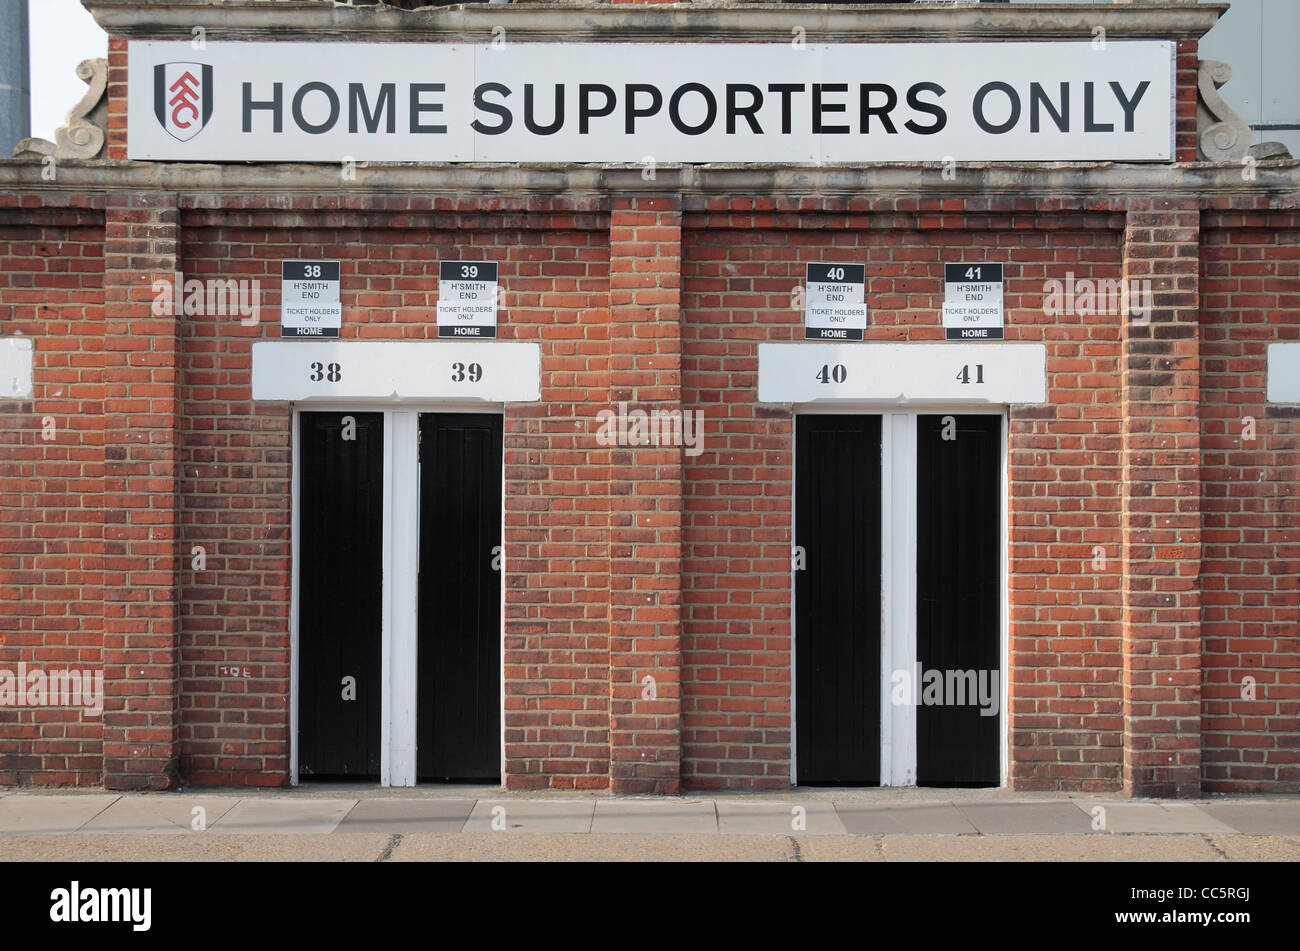 Traditional turnstiles for home supporters on Stevenage Road, Craven Cottage, home of Fulham Football Club, West London, UK. Stock Photo